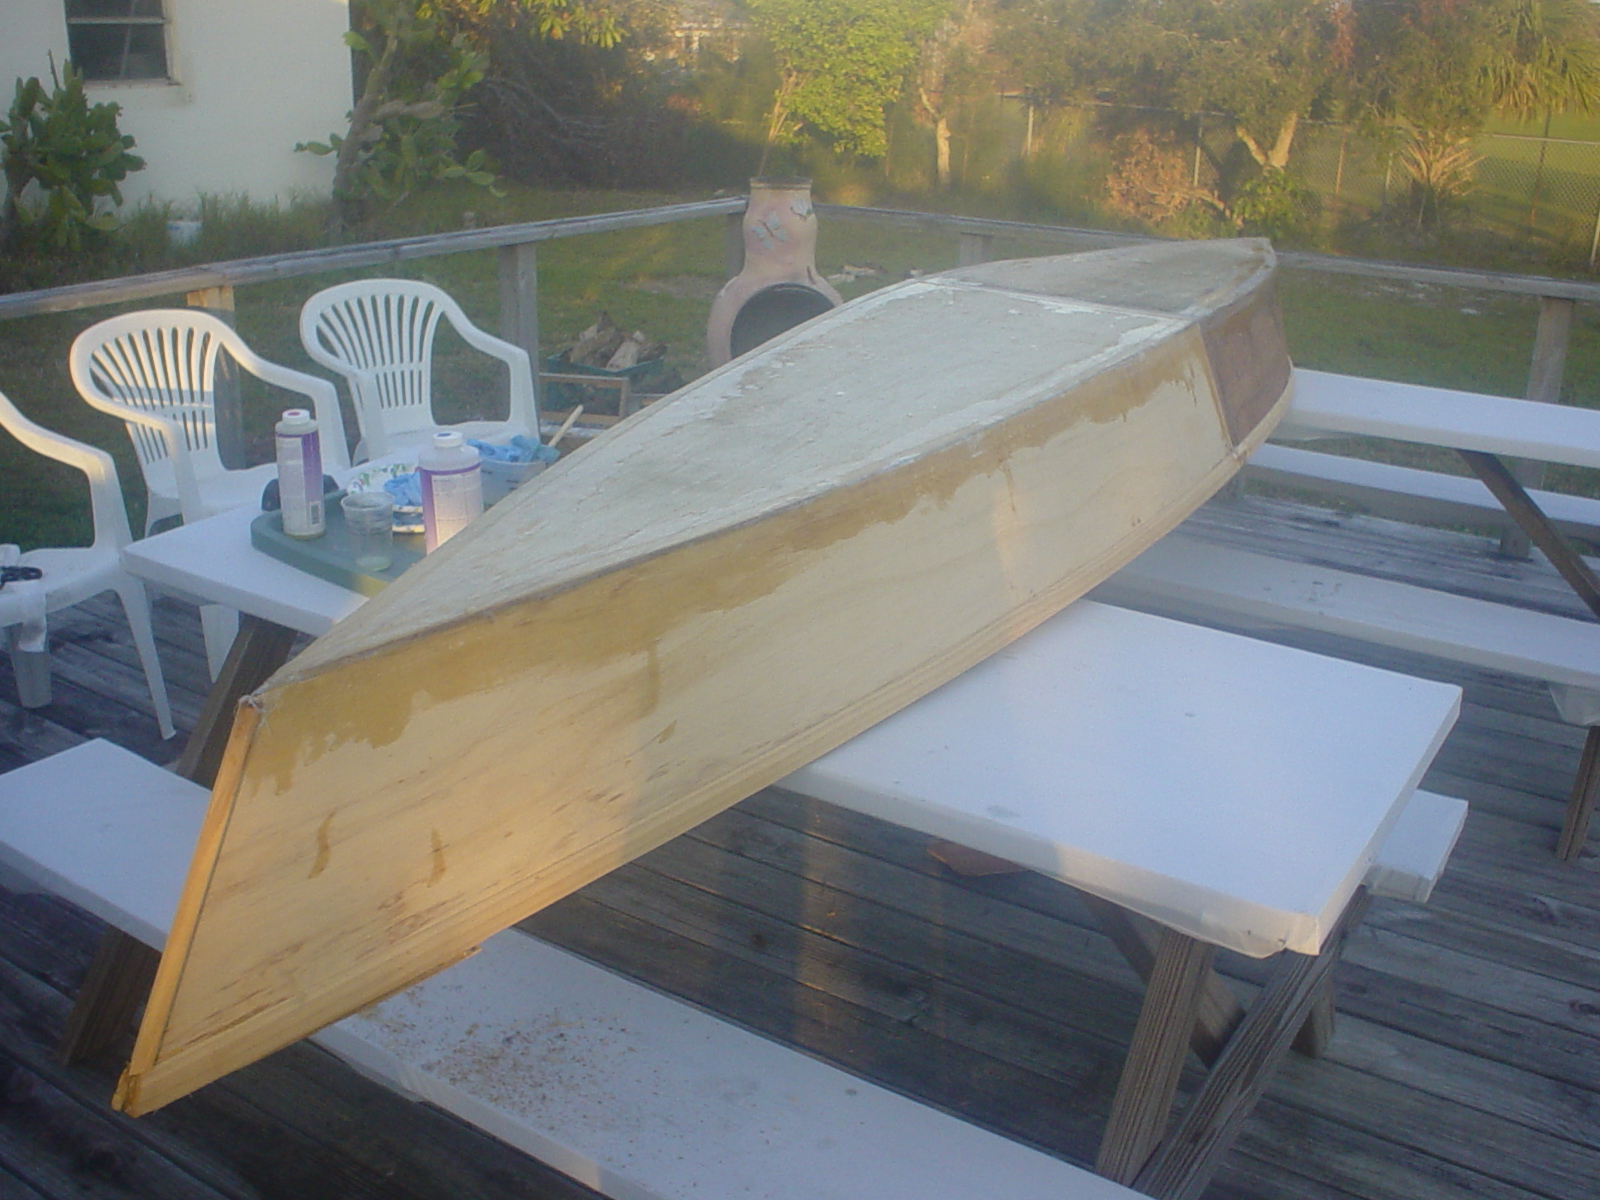 15 clever ideas for reuse boats - amazing diy, interior